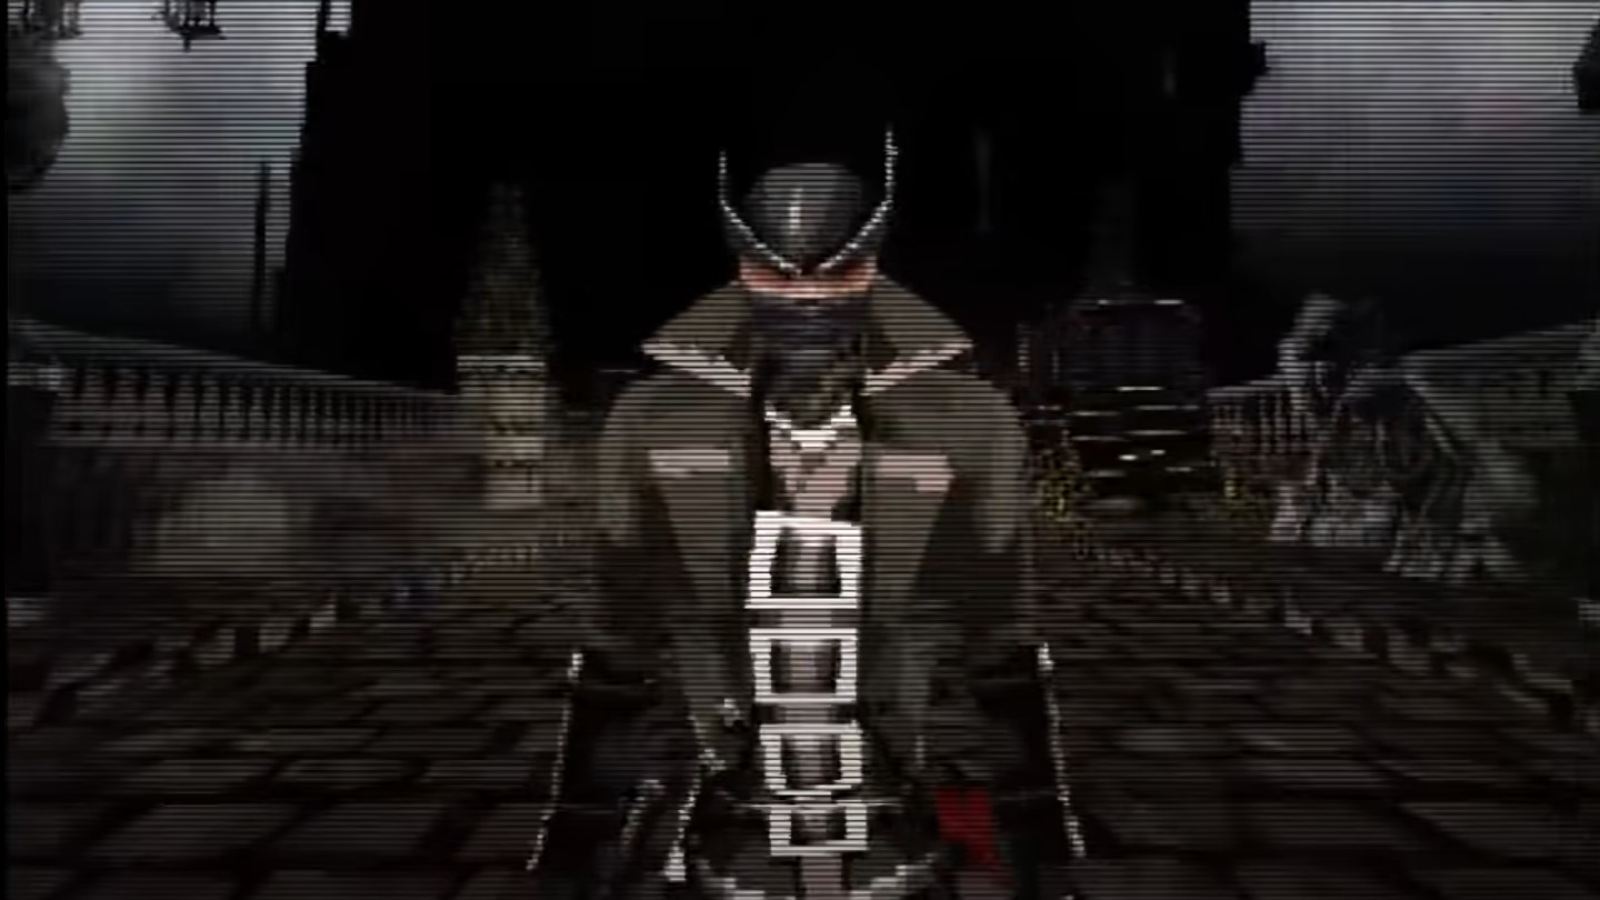 Bloodborne PS1-style demake coming to PC next year